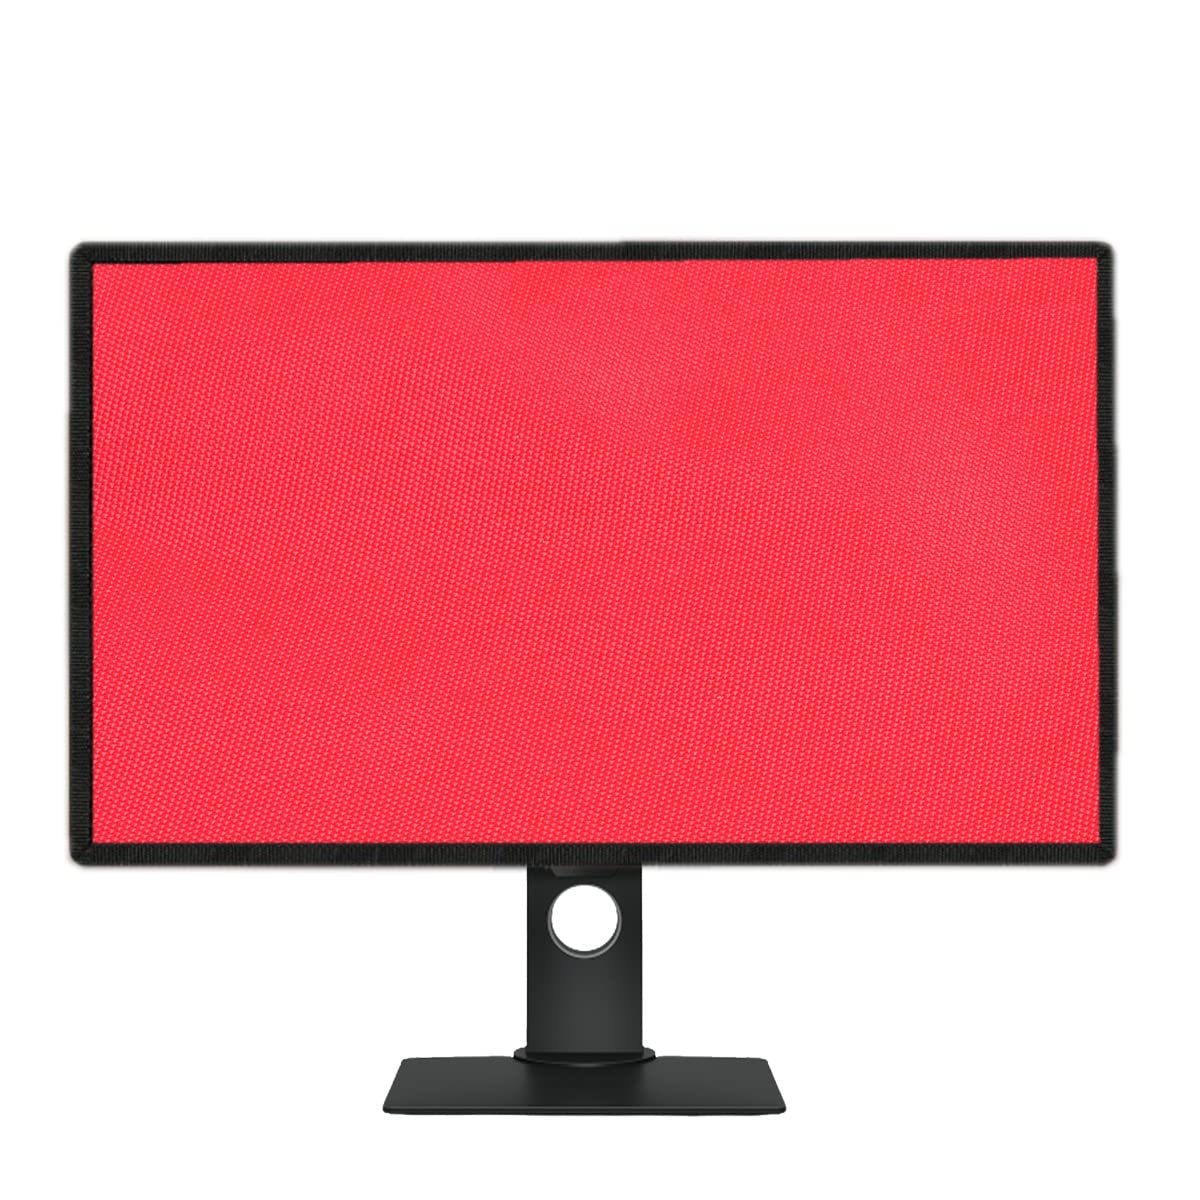 PalaP Super Premium Dust Proof Monitor Cover for LG 29 inches Monitor (RED)